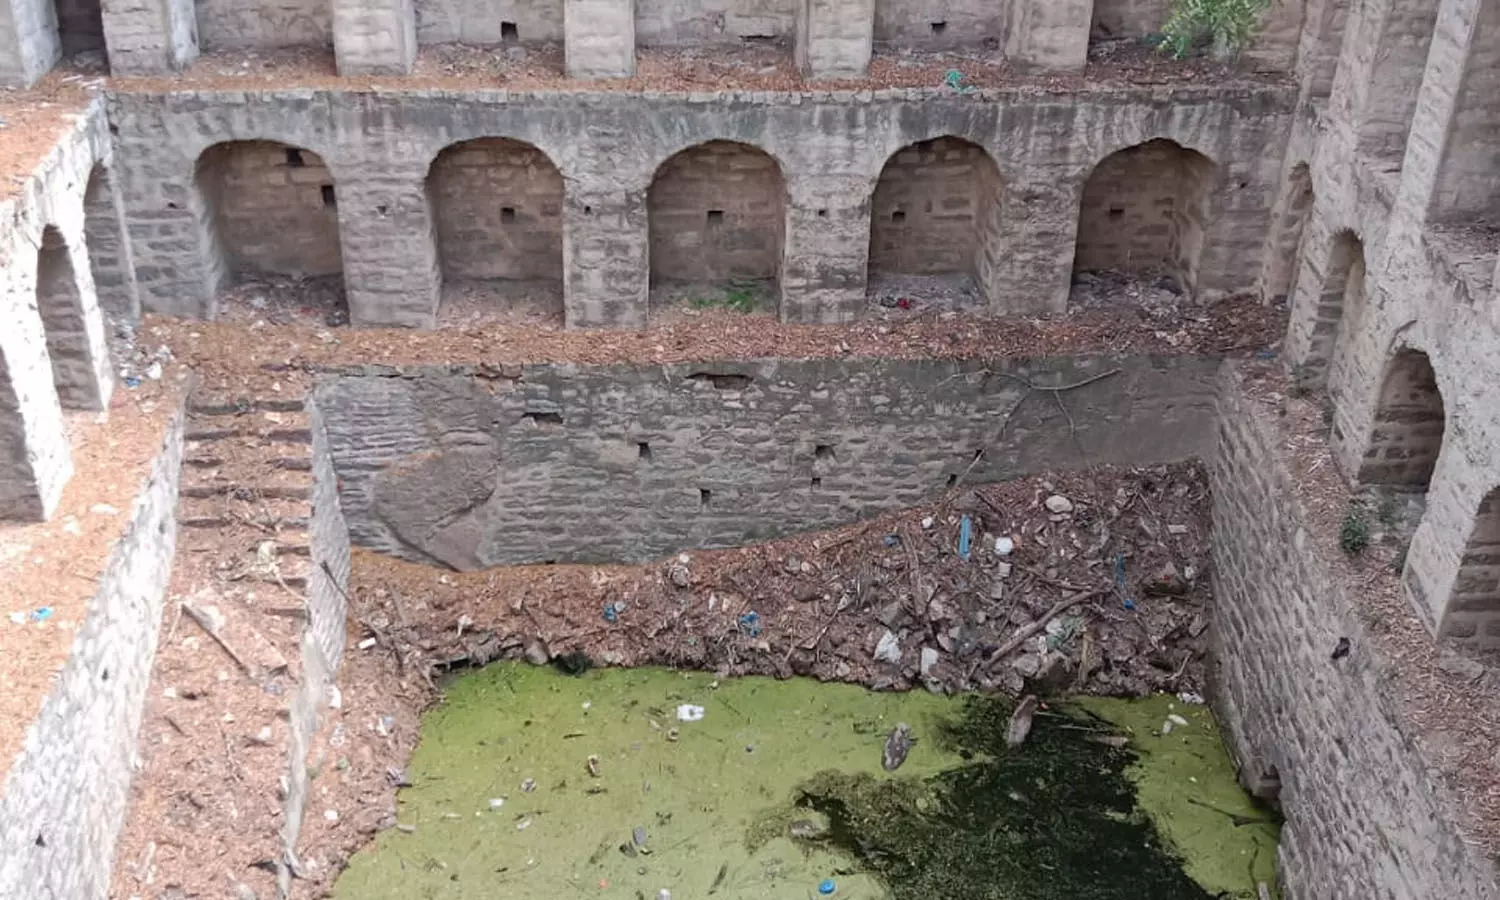 Stepwell in Falaknuma bus depot up for renovation in Hyderabad